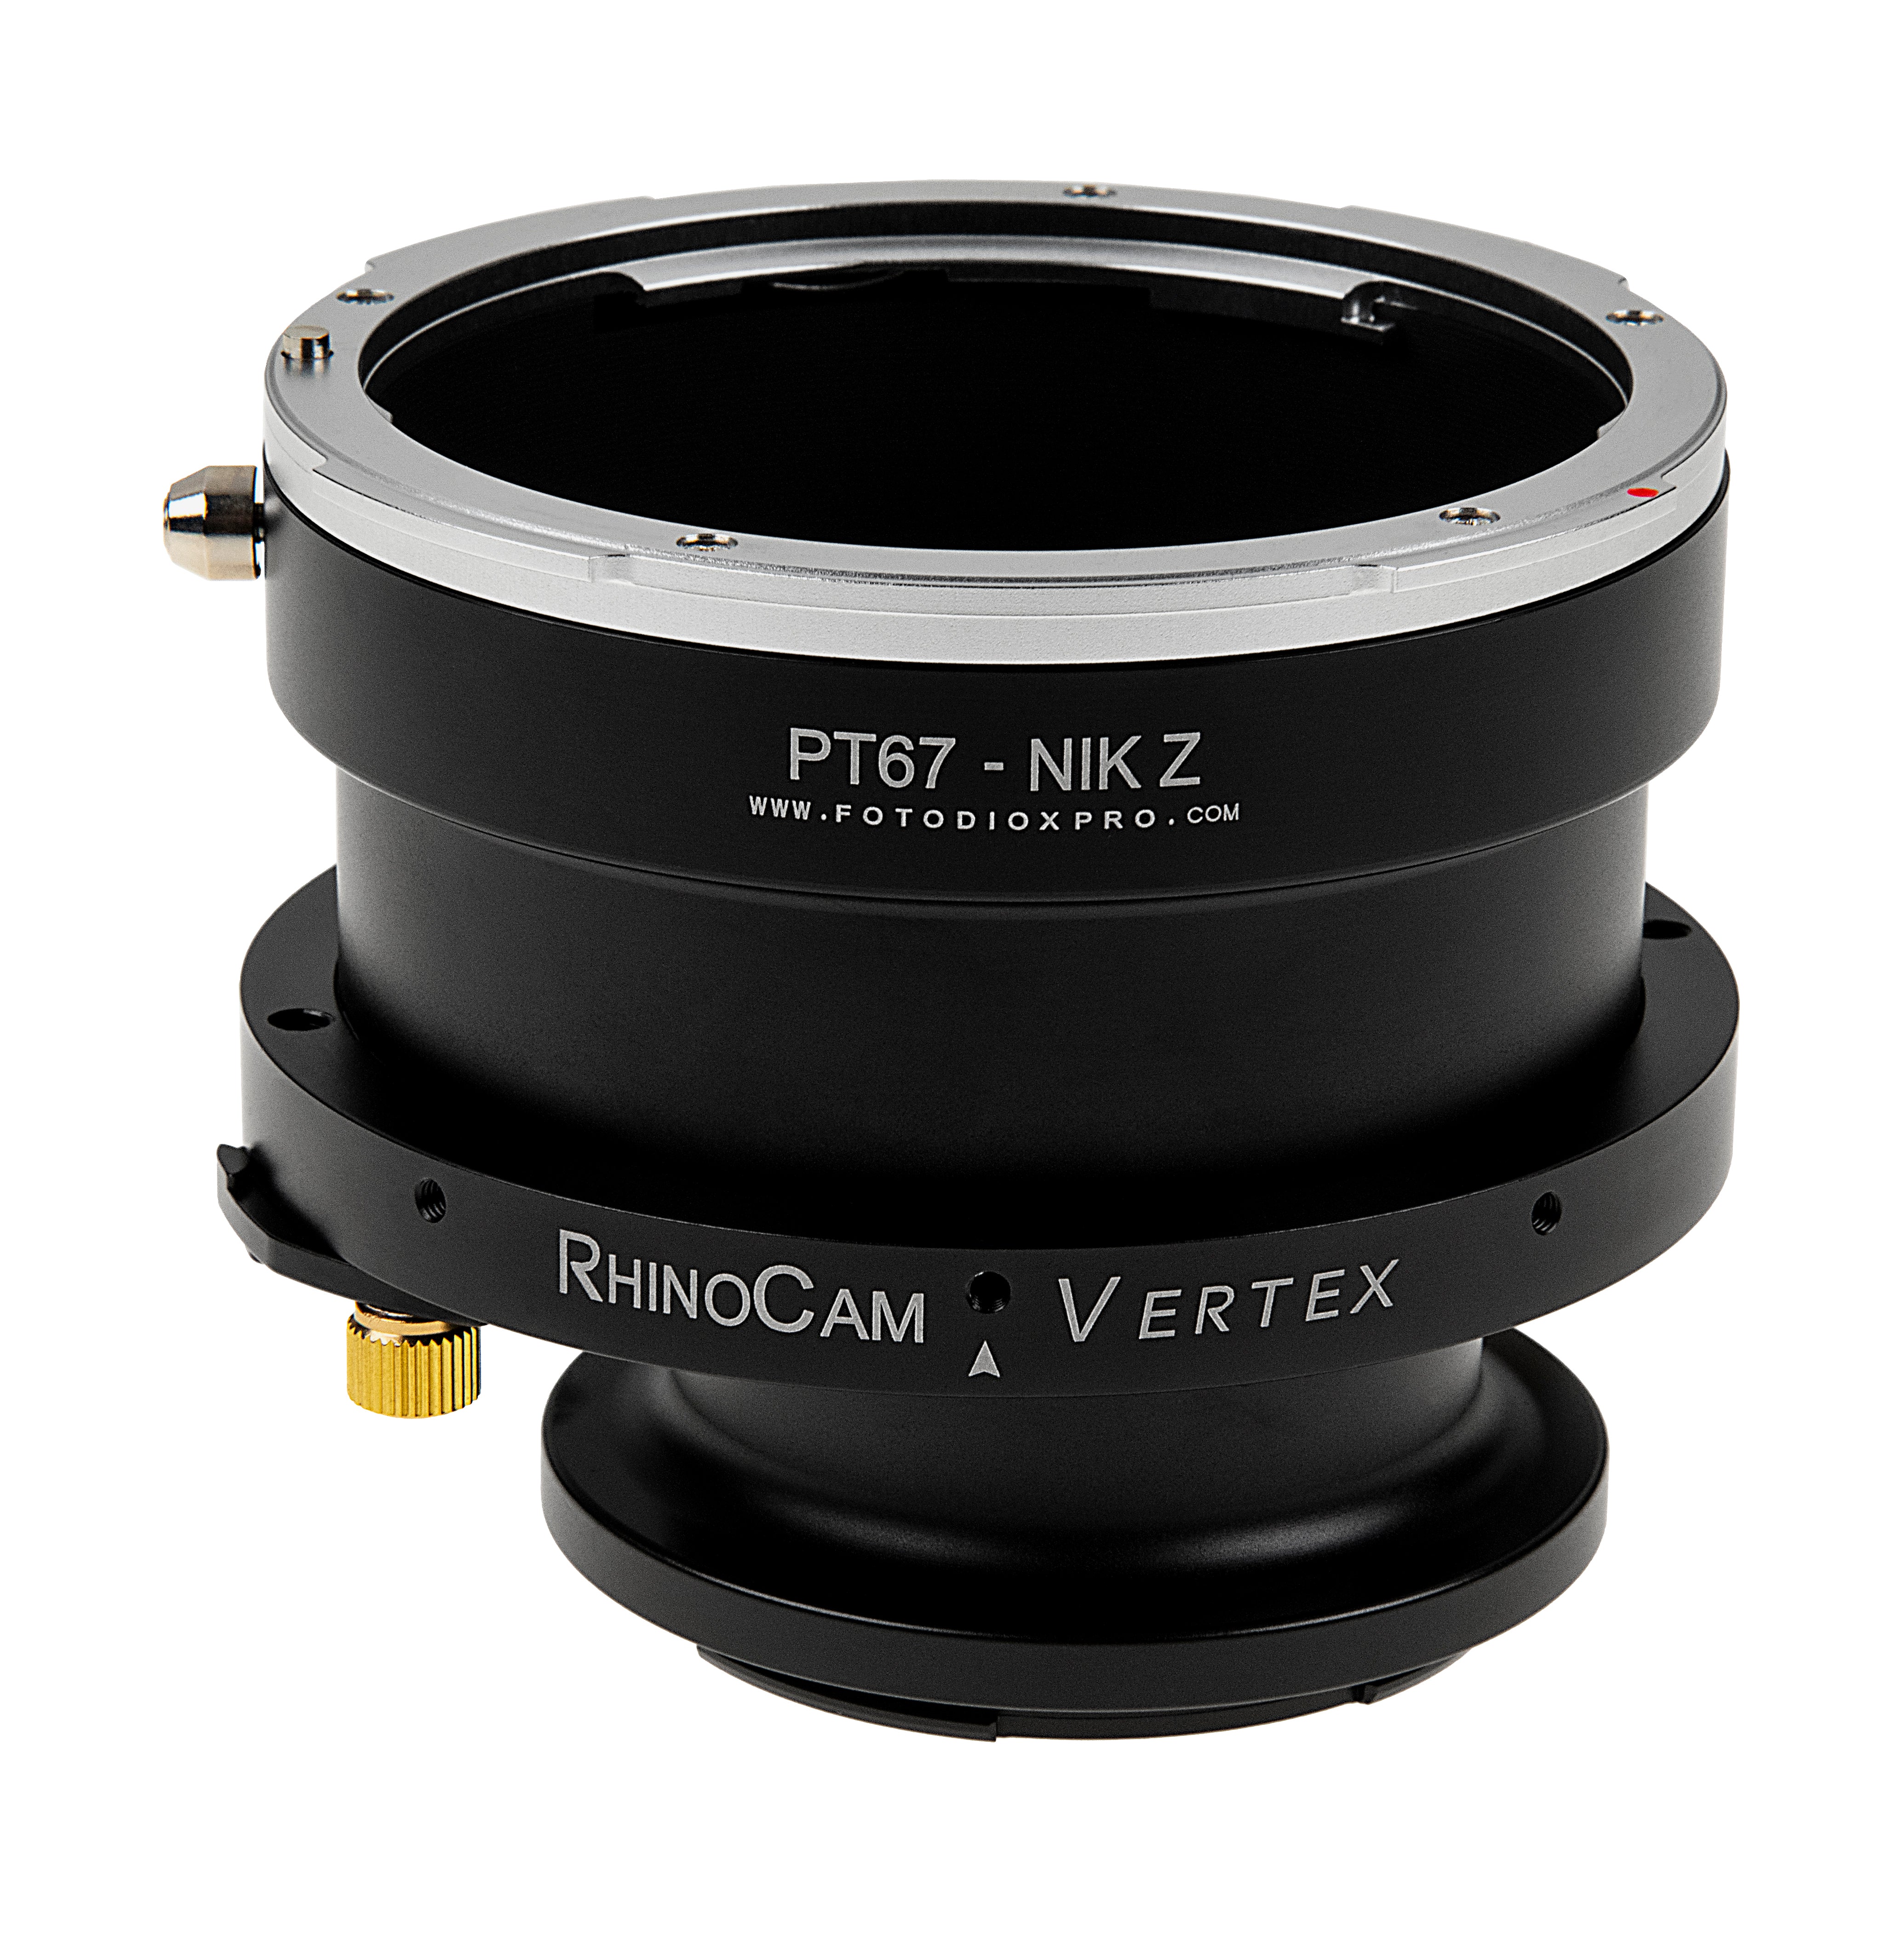 RhinoCam Vertex Rotating Stitching Adapter, Compatible with Pentax 6x7 (P67) Mount SLR Lens to Nikon Z-Mount Mirrorless Cameras